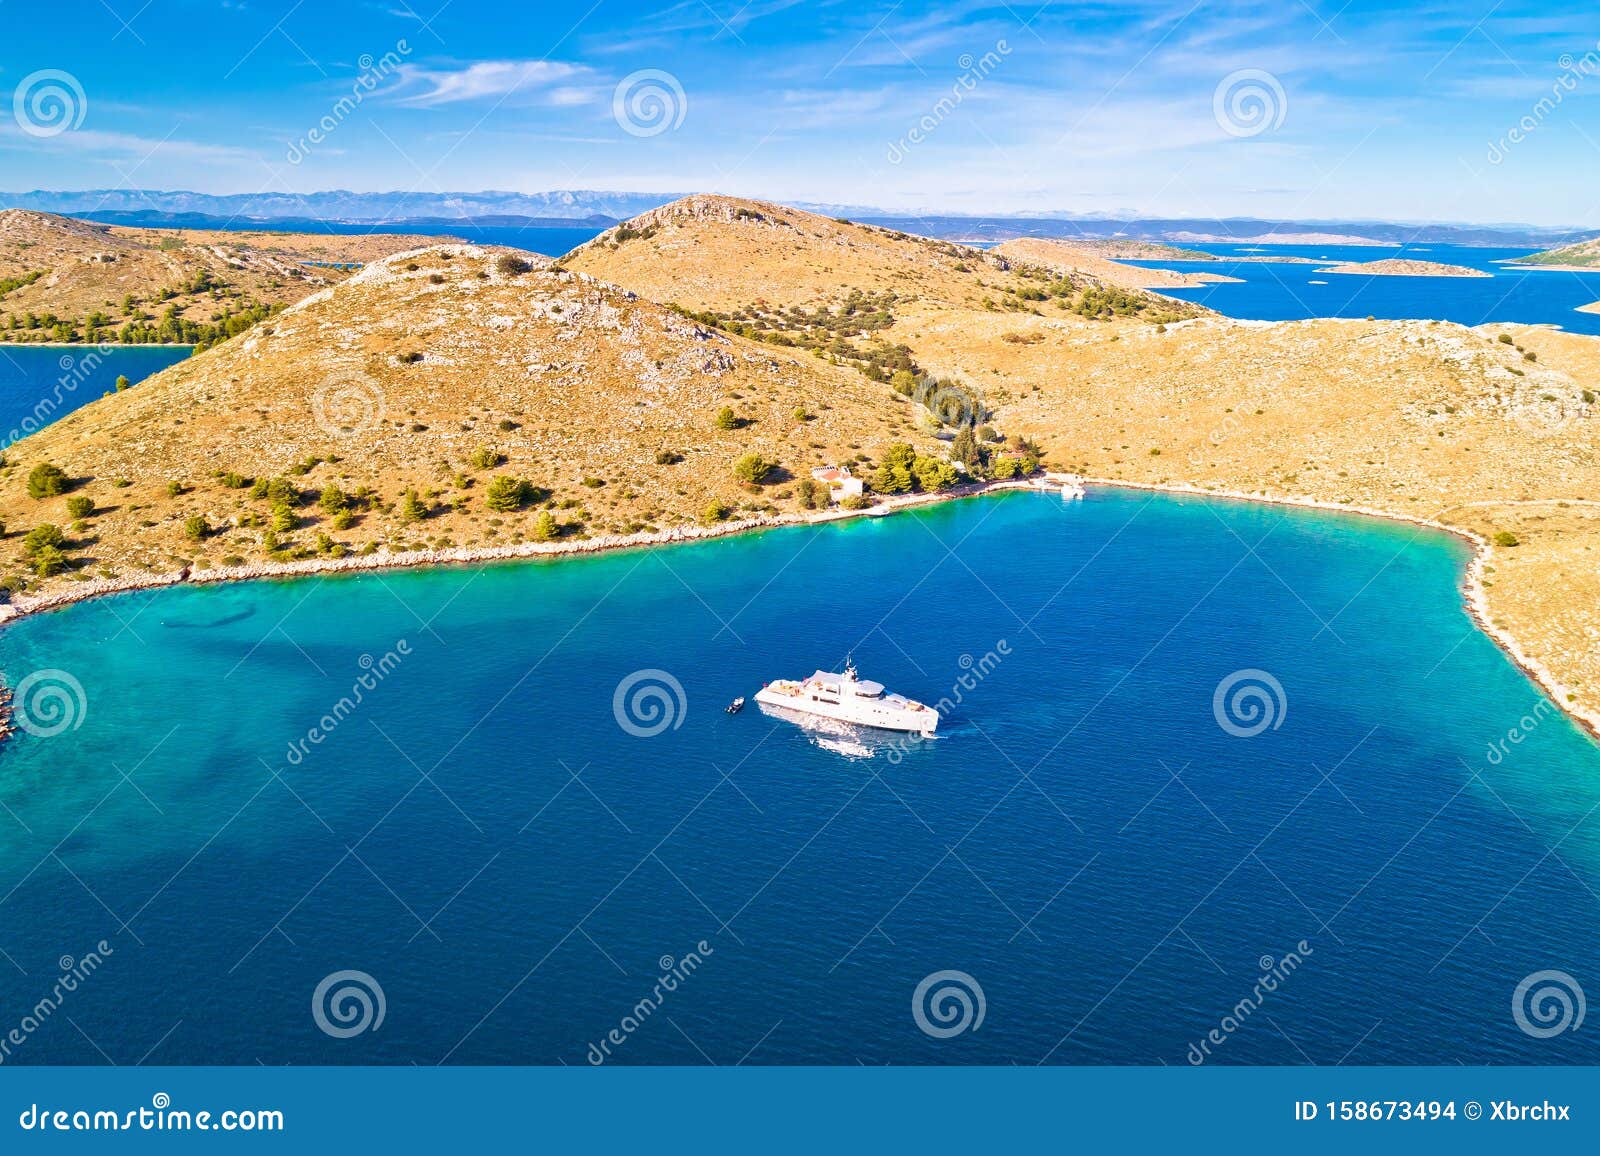 Kornati Islands Travel Guide | Things to do | Time Out Croatia